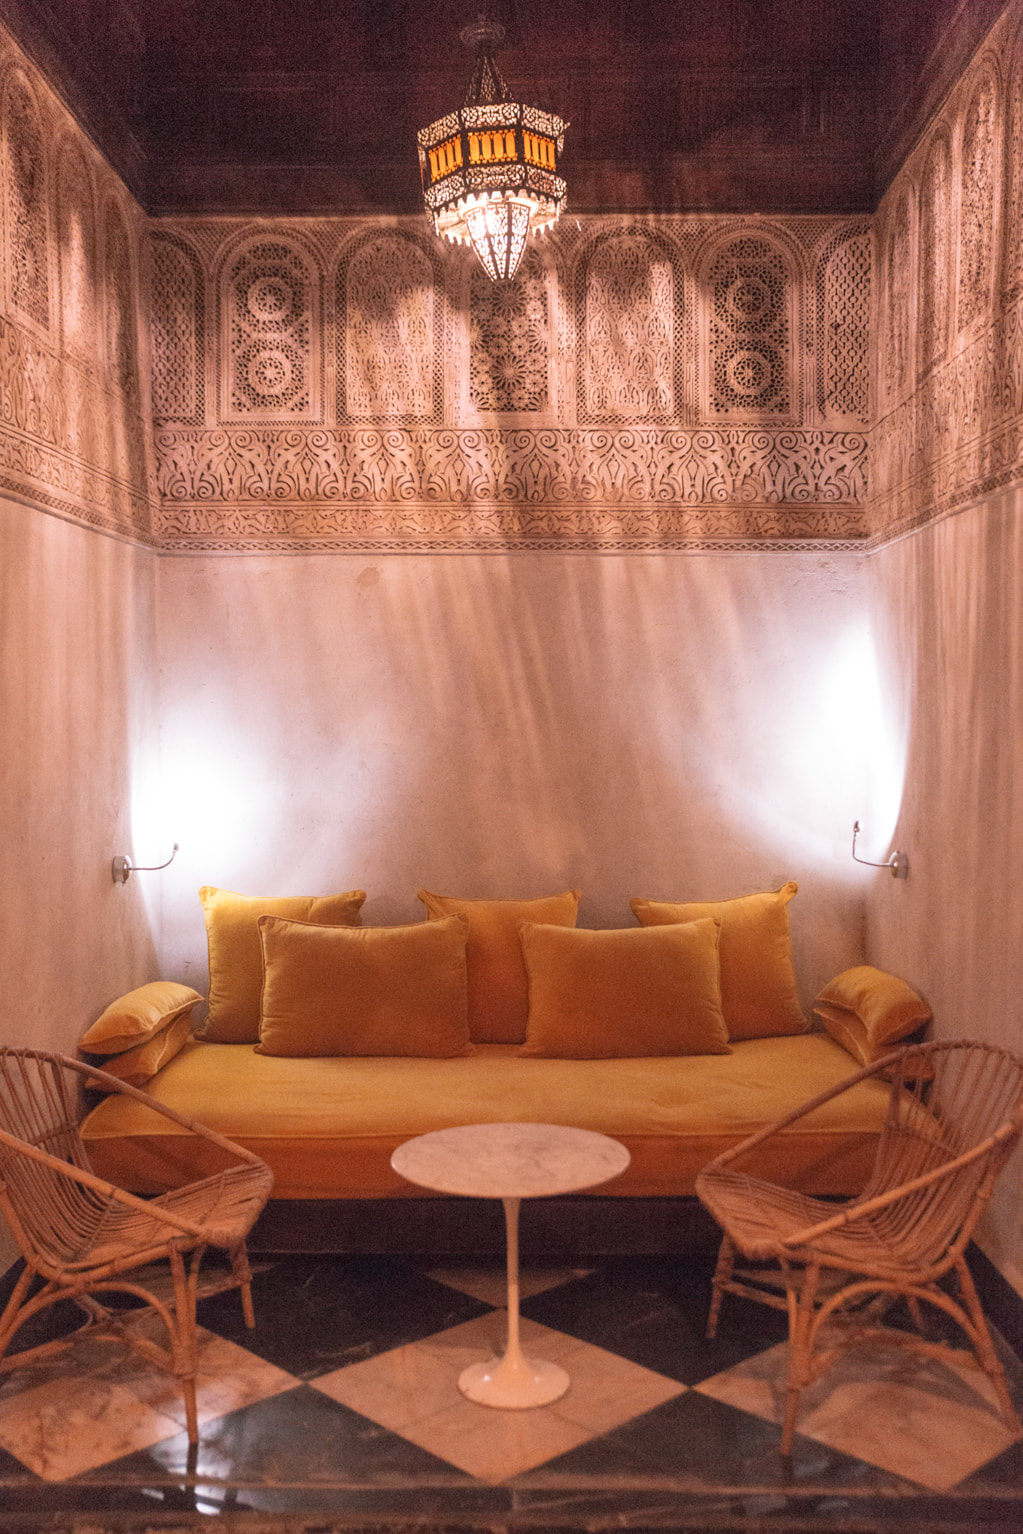 Moroccan nights, Marrakesh. Our first night arriving at the El Fenn Hotel, Morocco By The Belle Blog. 